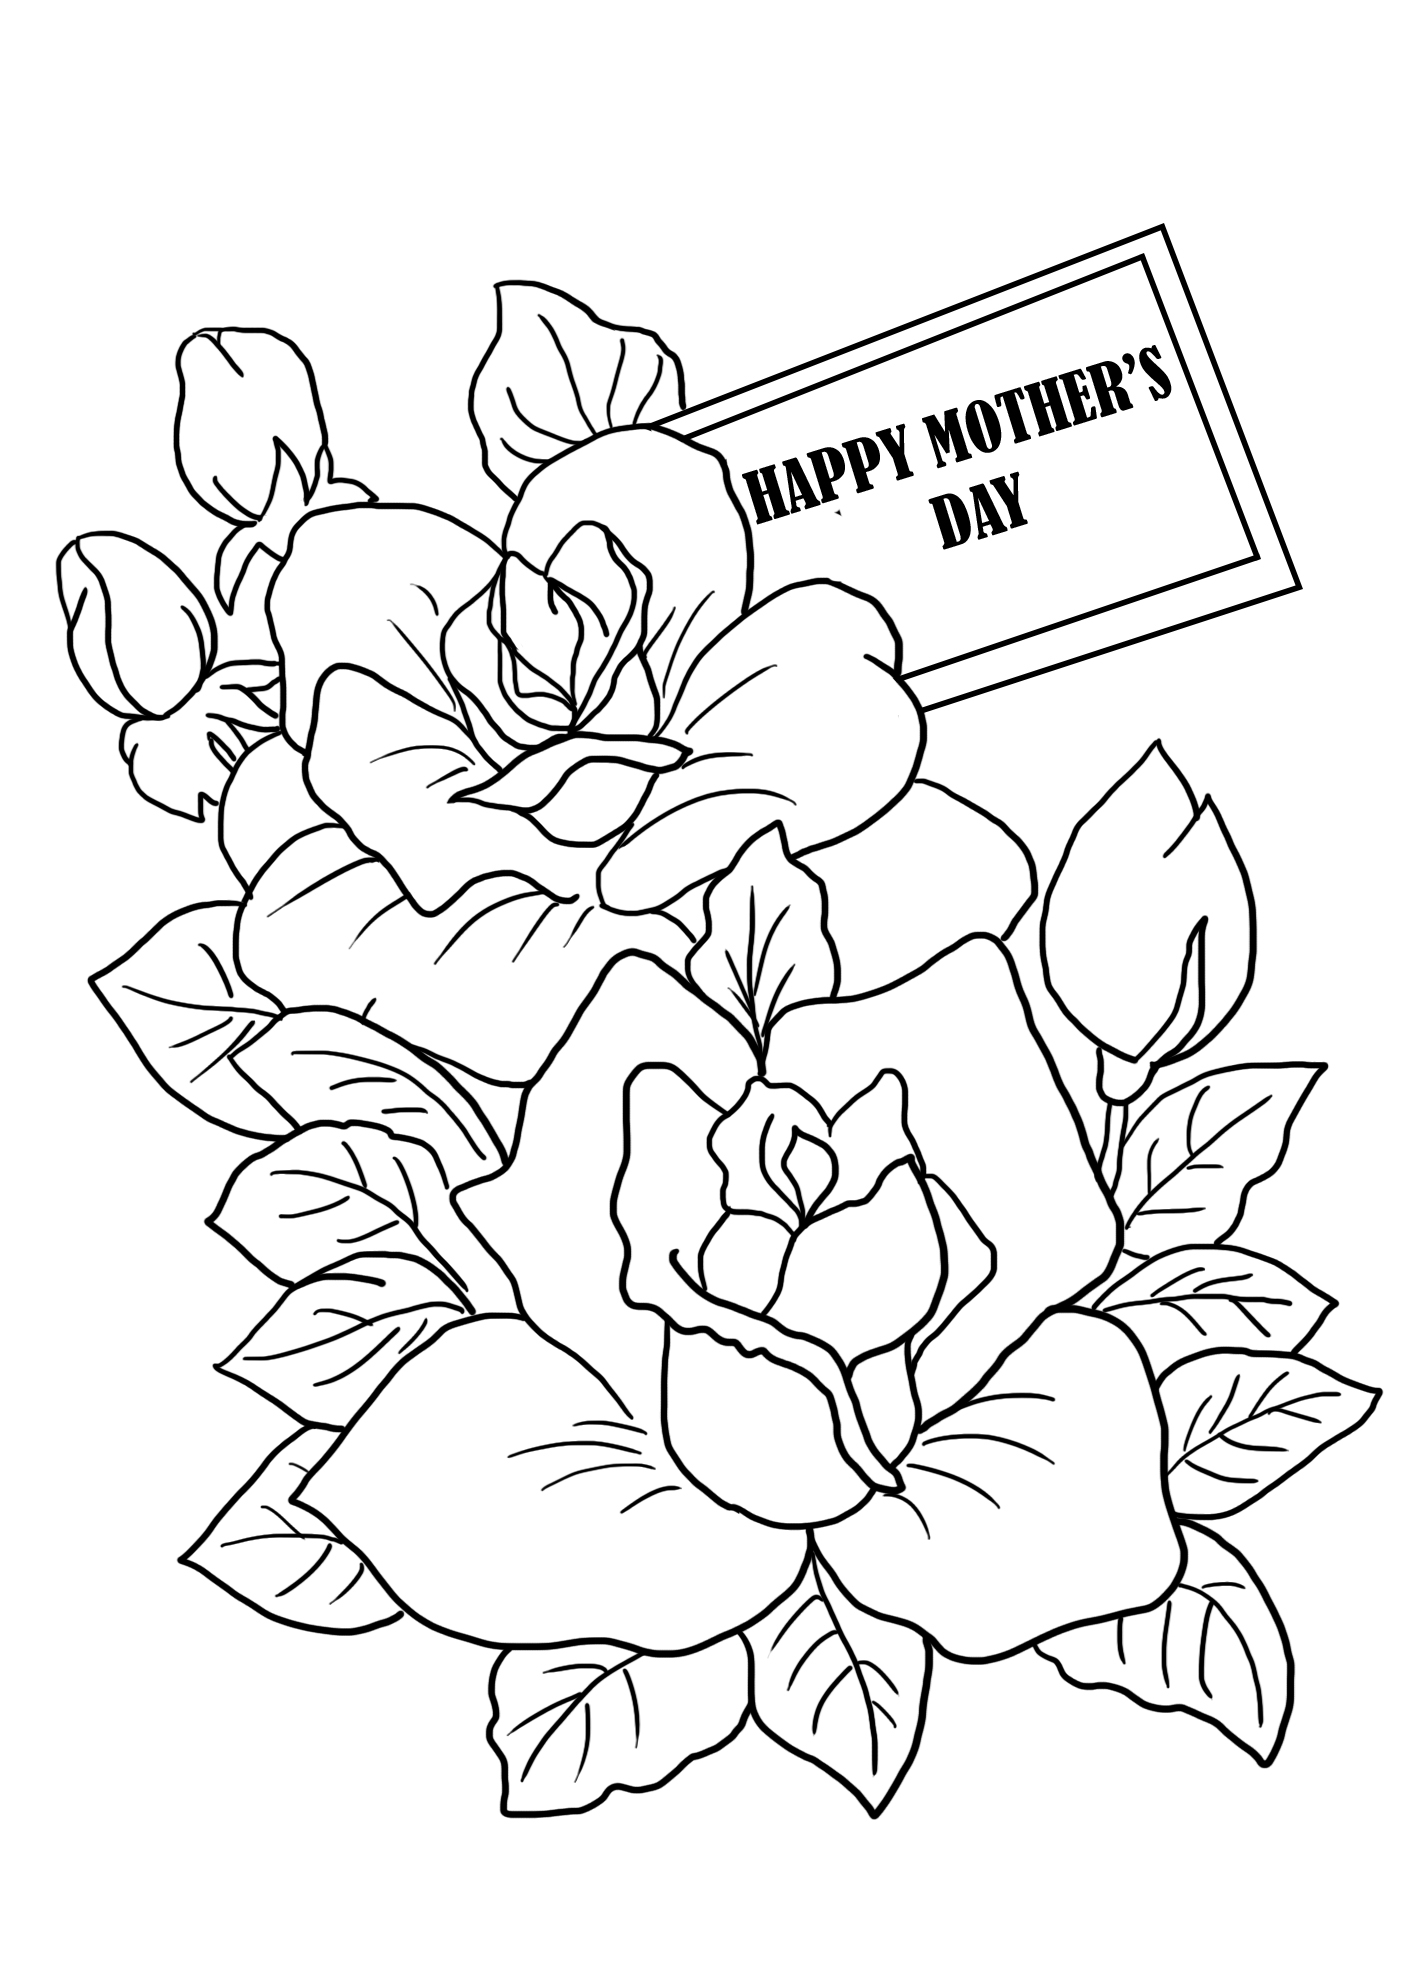 flower coloring for Mother's day